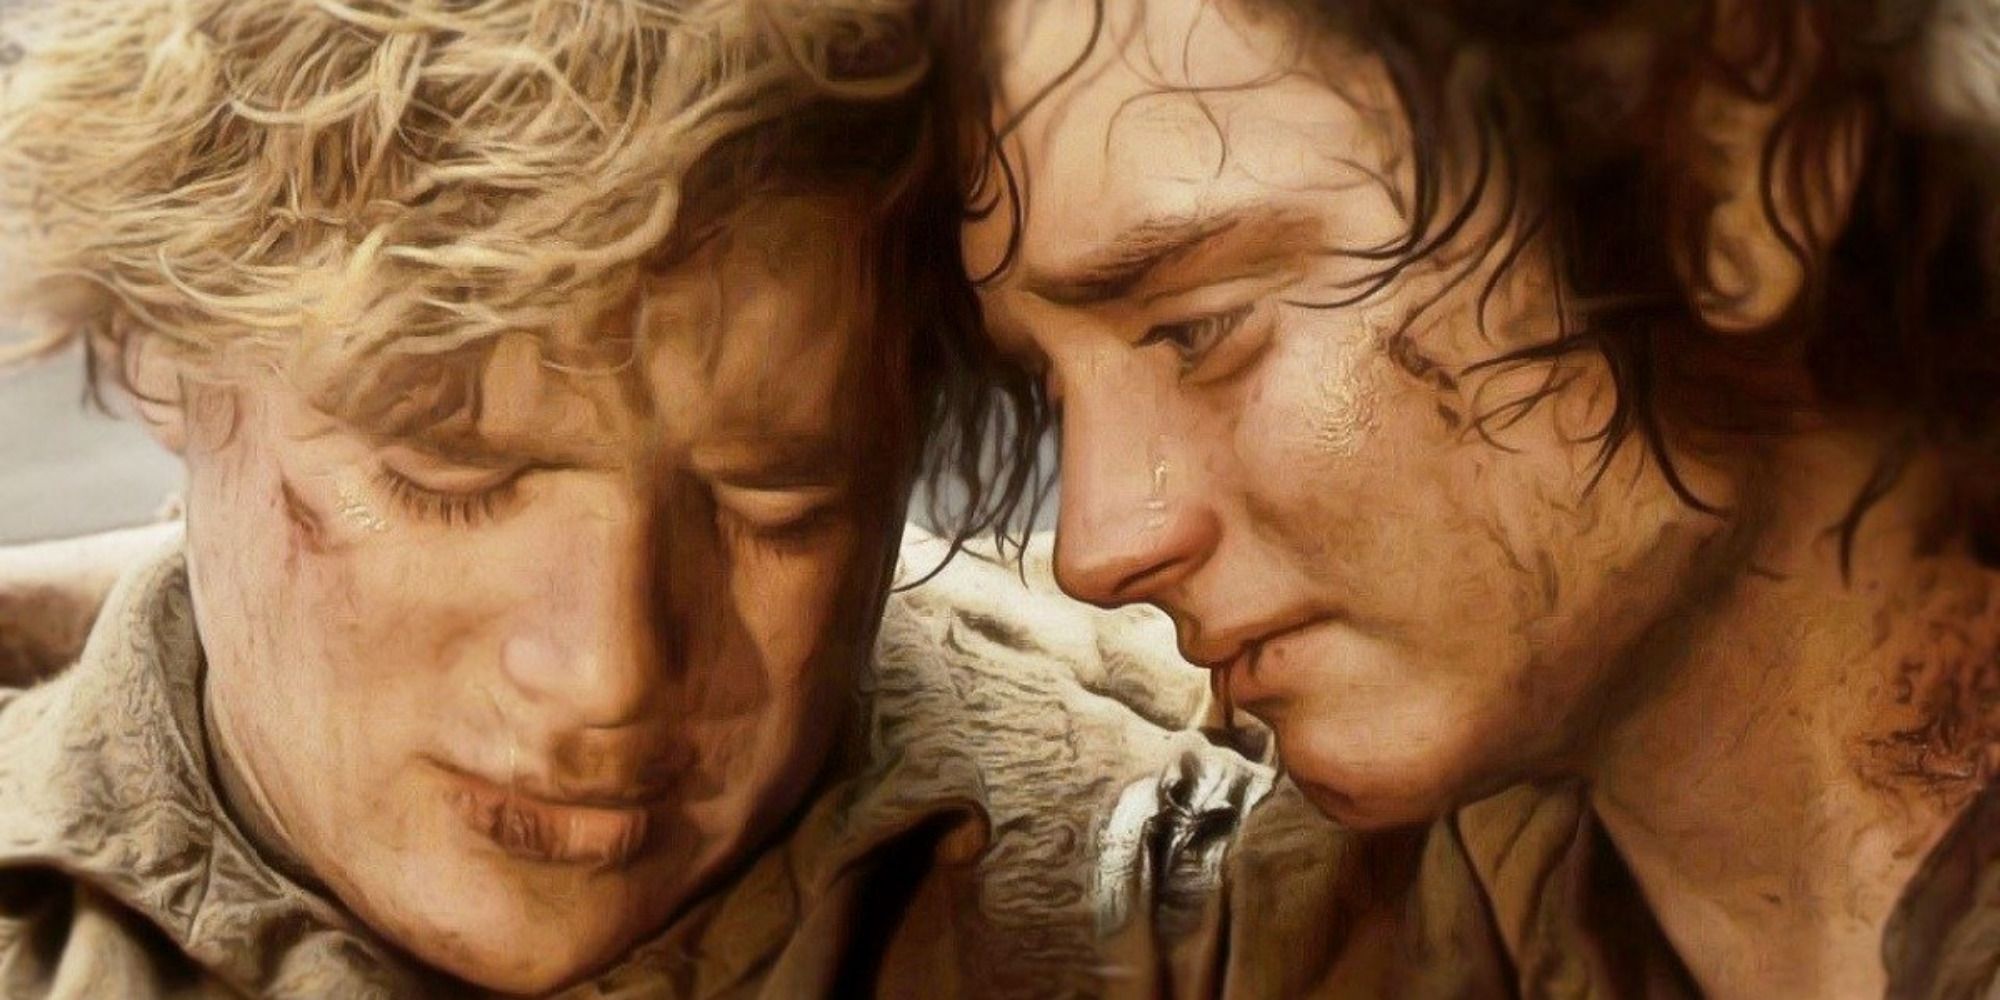 Sam and Frodo from "The Lord of the Rings", close together looking defeated and exhausted